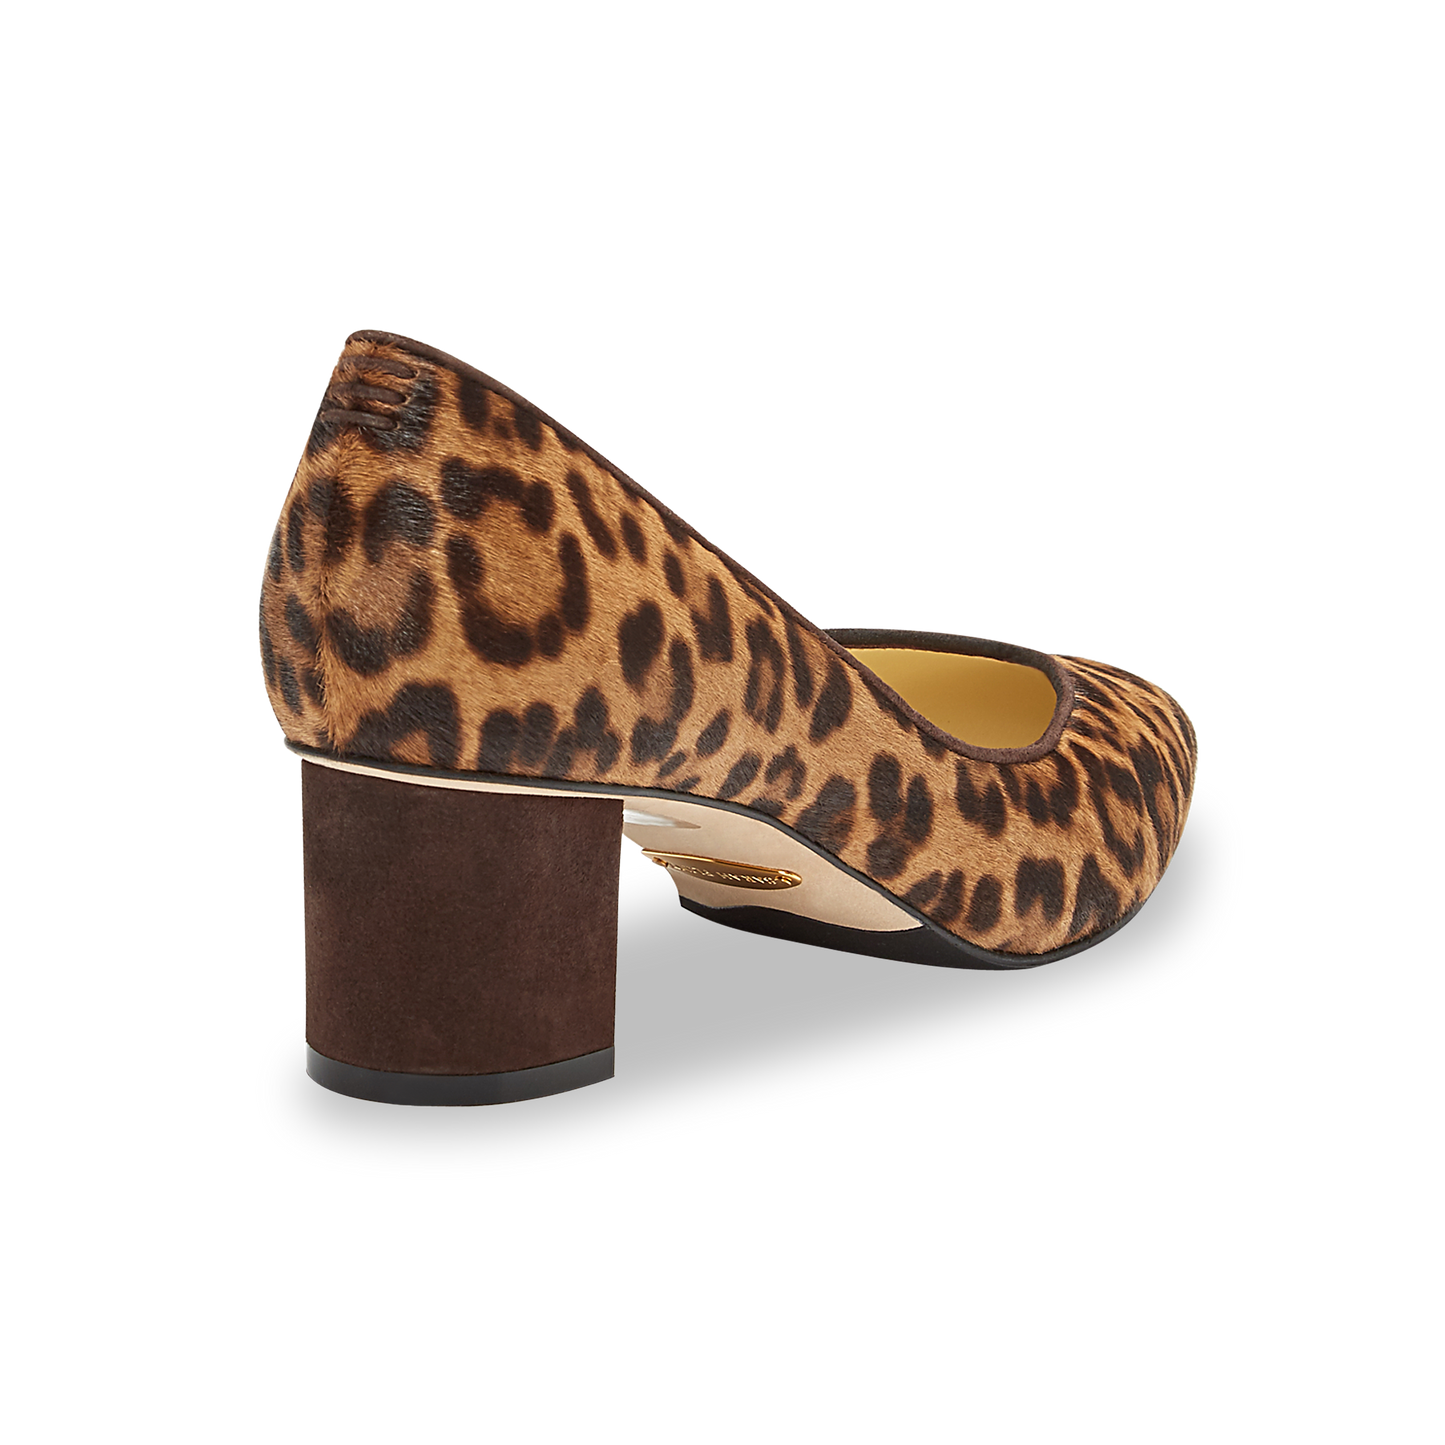 50mm Italian Made Pointed Toe Perfect Emma Pump in Chocolate Leopard Hair Calf